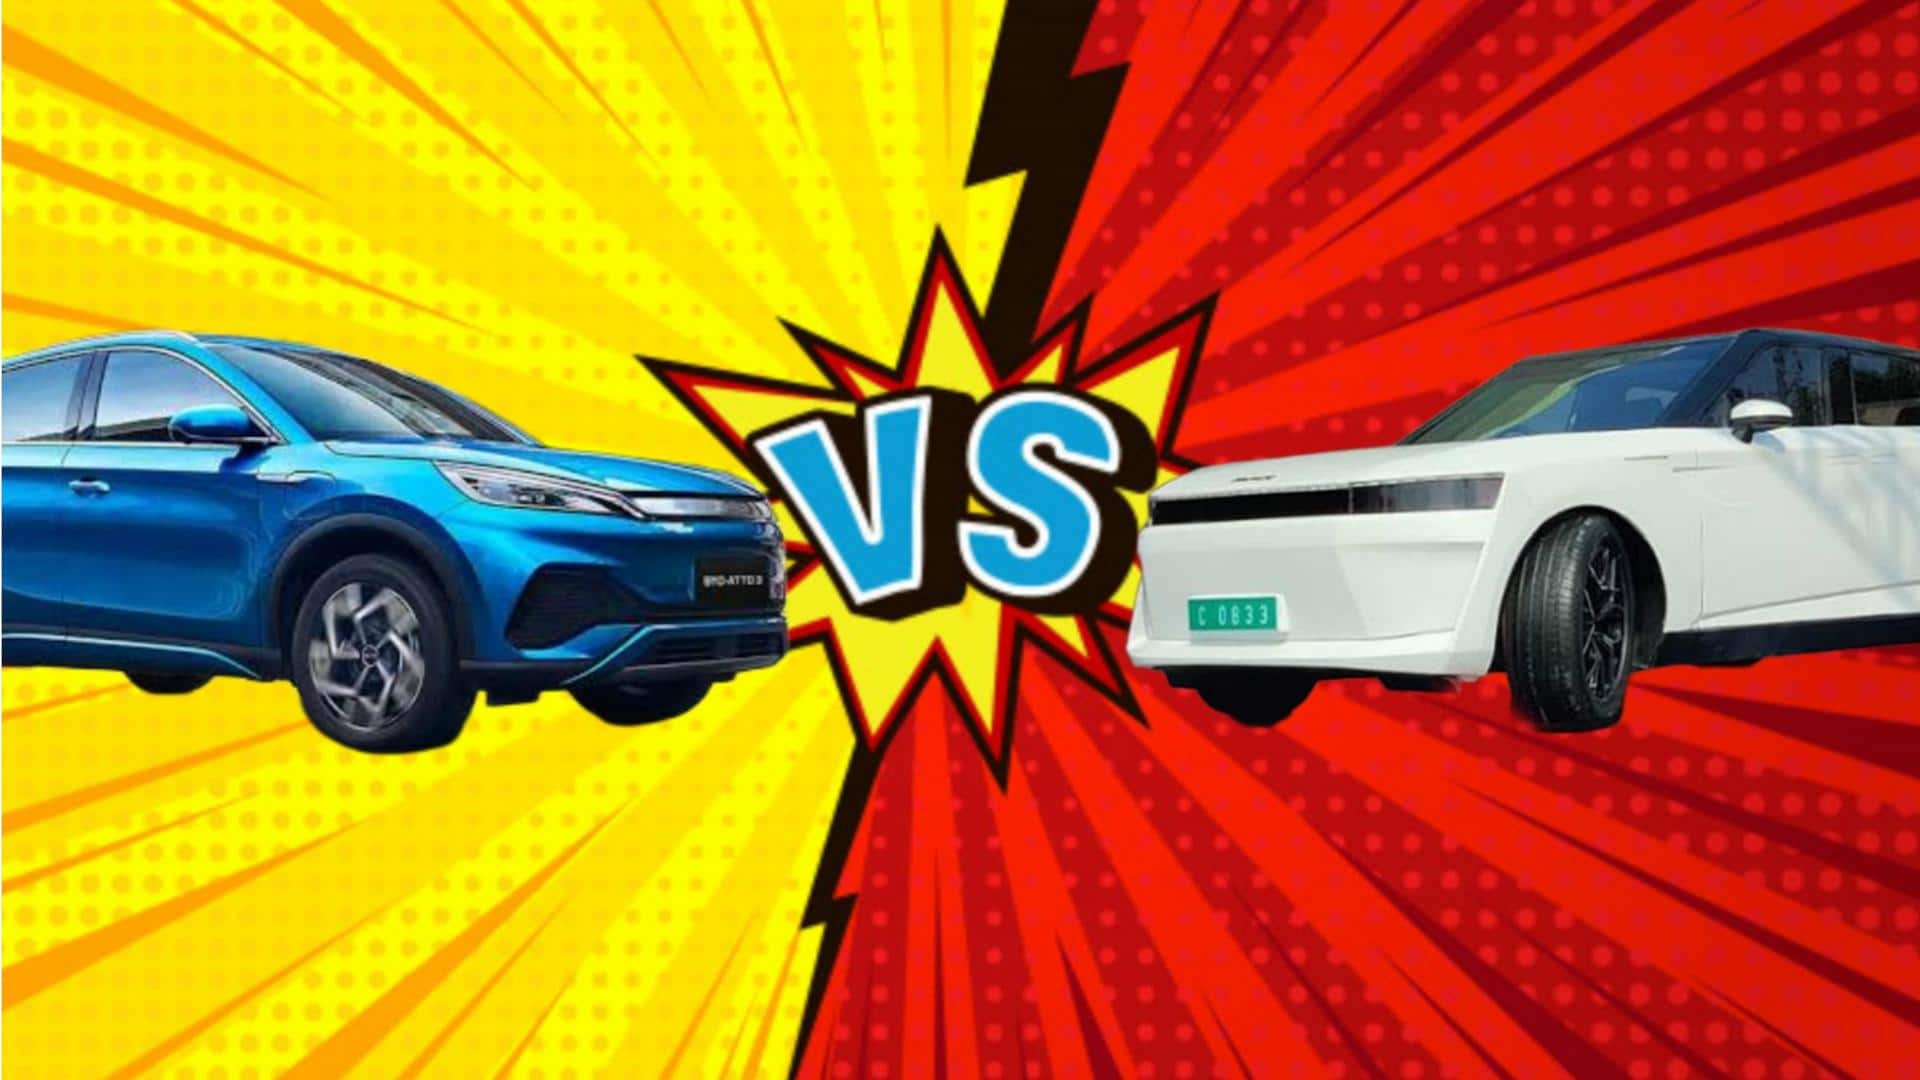 Pravaig DEFY v/s BYD Atto 3: Which one is better?